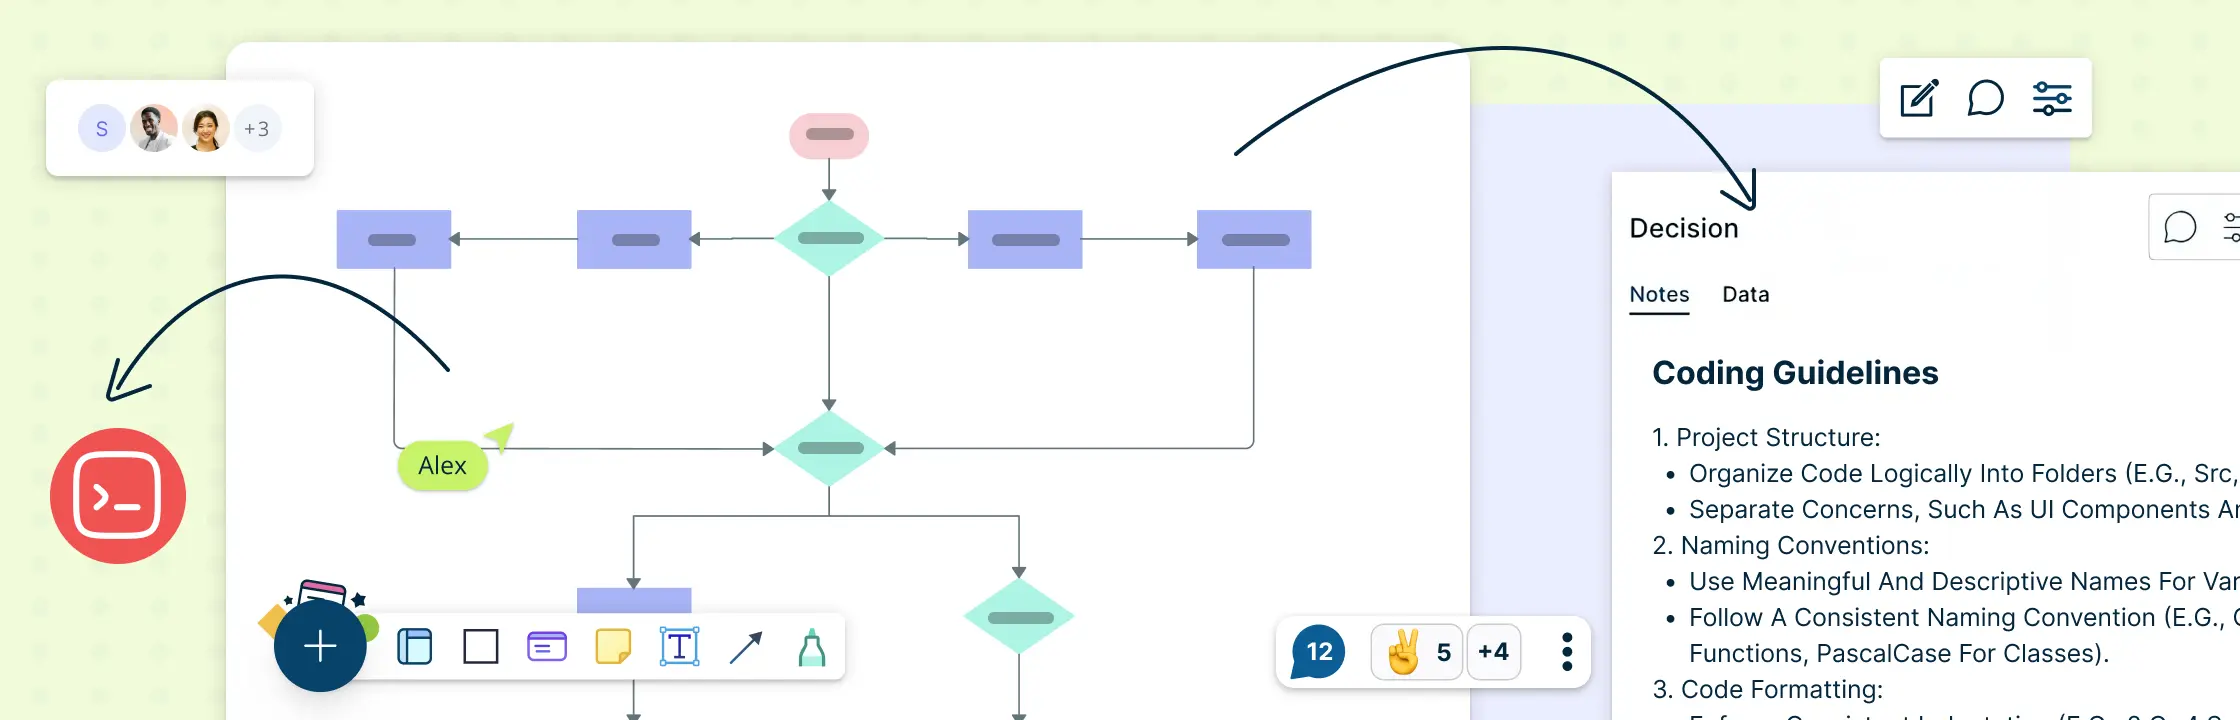 How Flowcharts Can Supercharge Programming